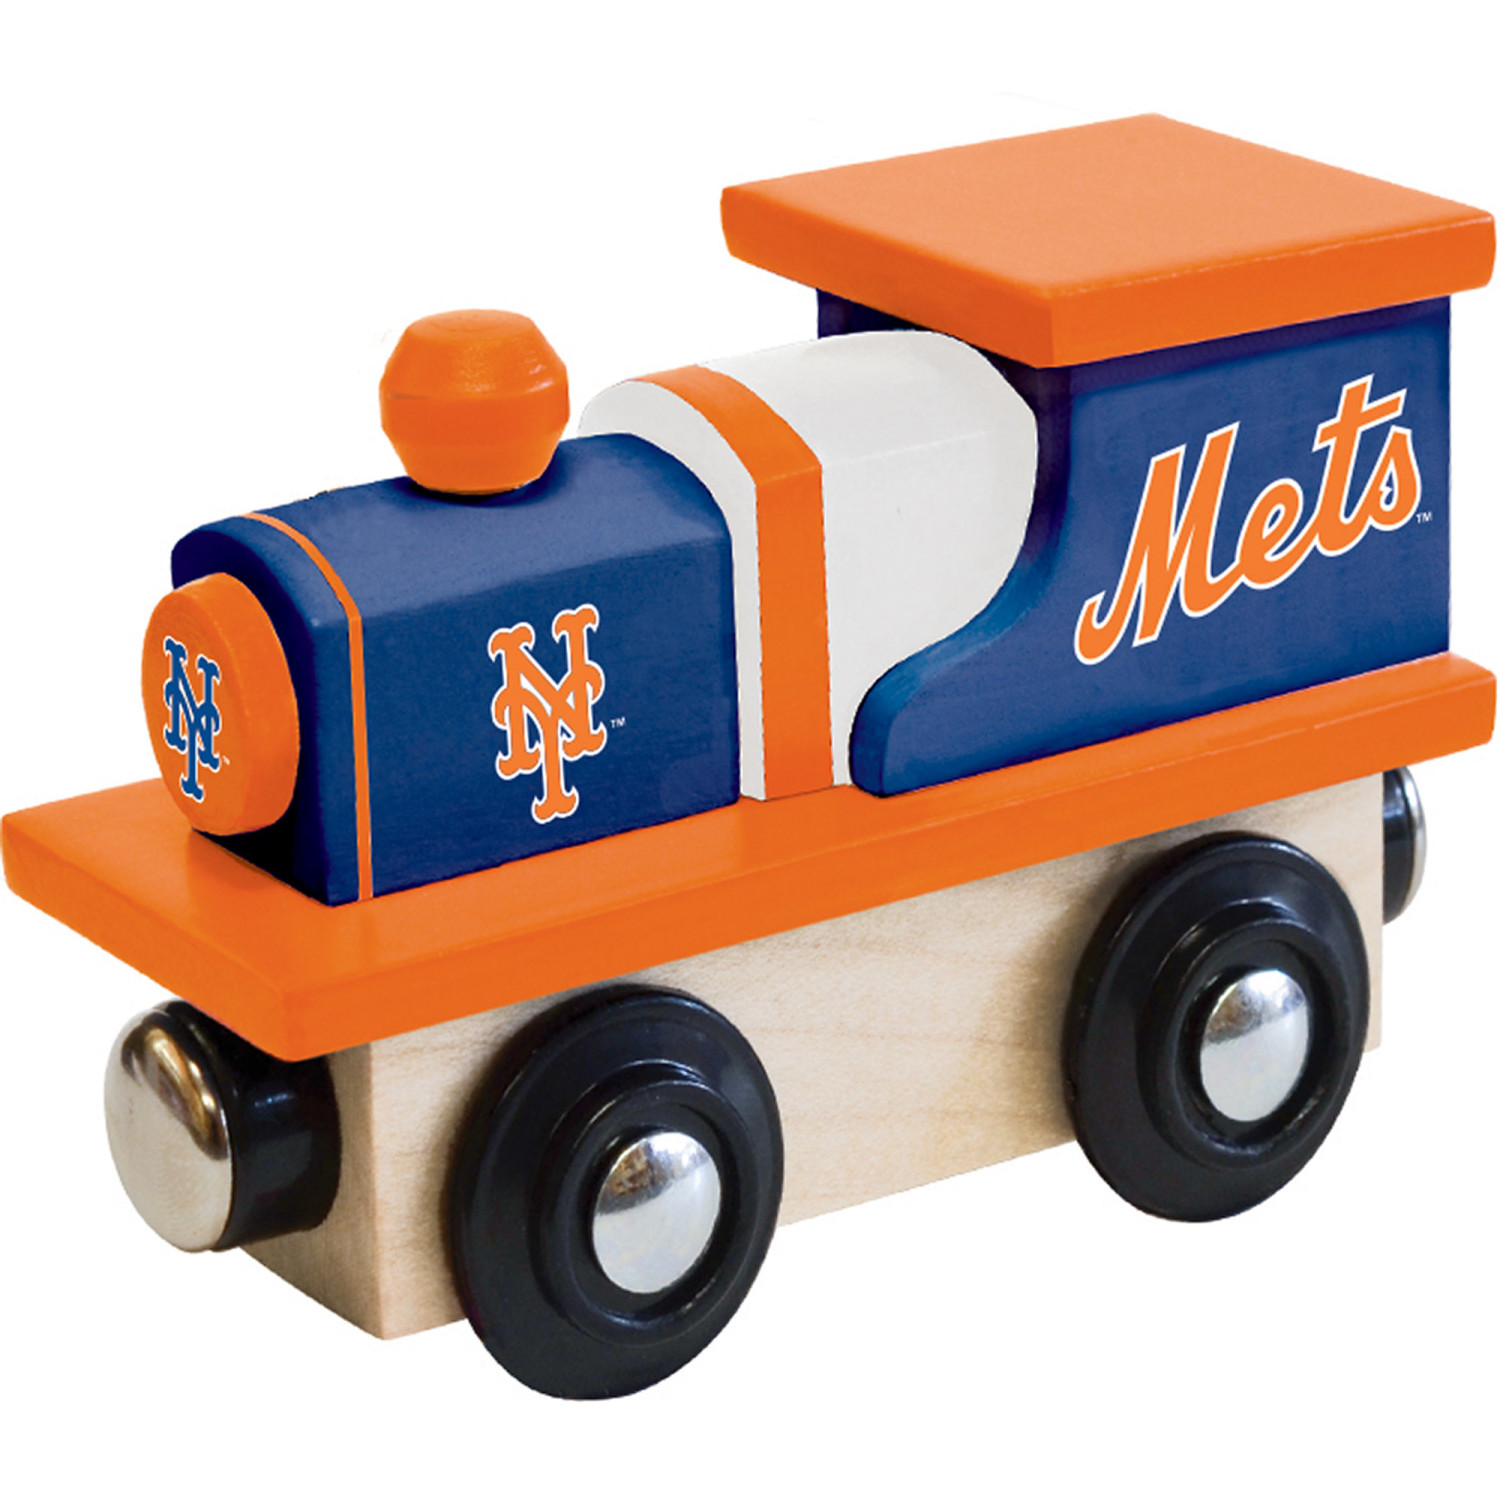 MasterPieces Officially Licensed MLB New York Mets Wooden Toy Train Engine For Kids - image 2 of 5